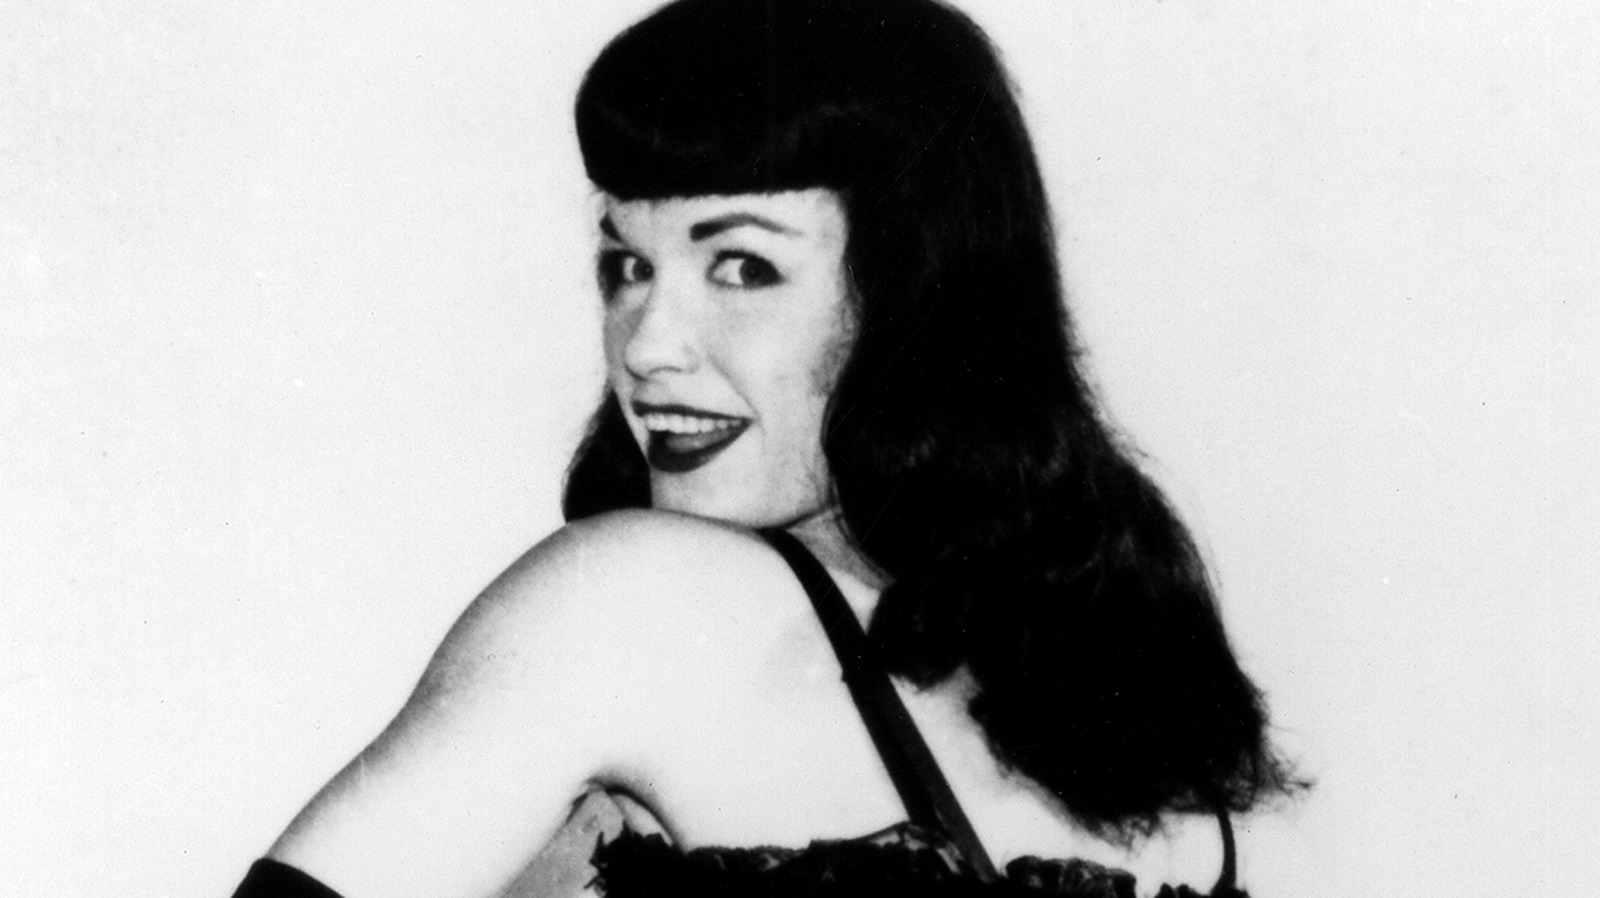 barbiie luvv recommends Nude Photos Of Bettie Page